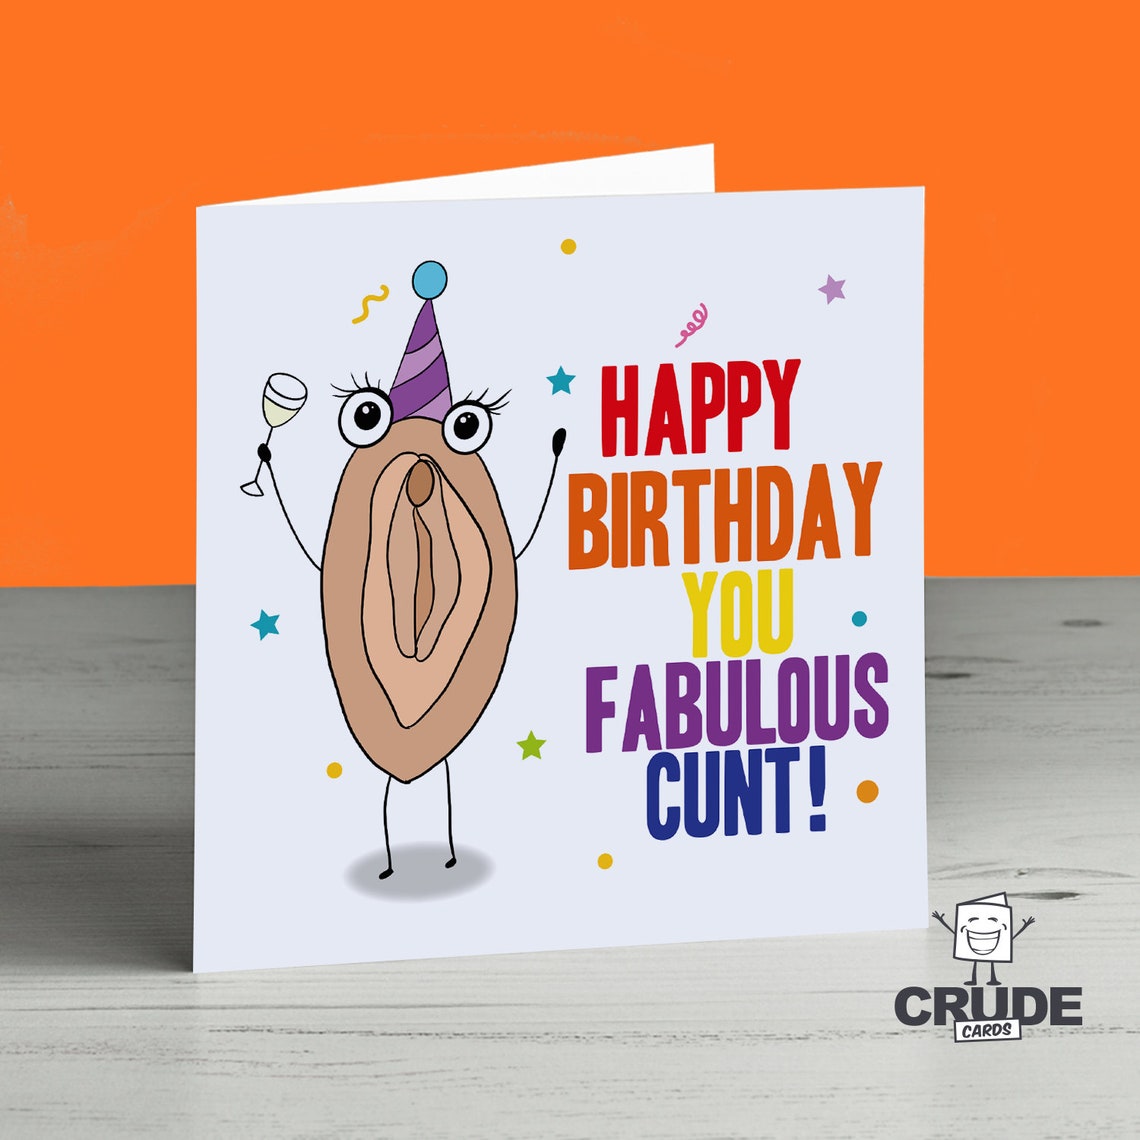 Happy Birthday You Fabulous Cunt Card Crude Naughty Funny Etsy